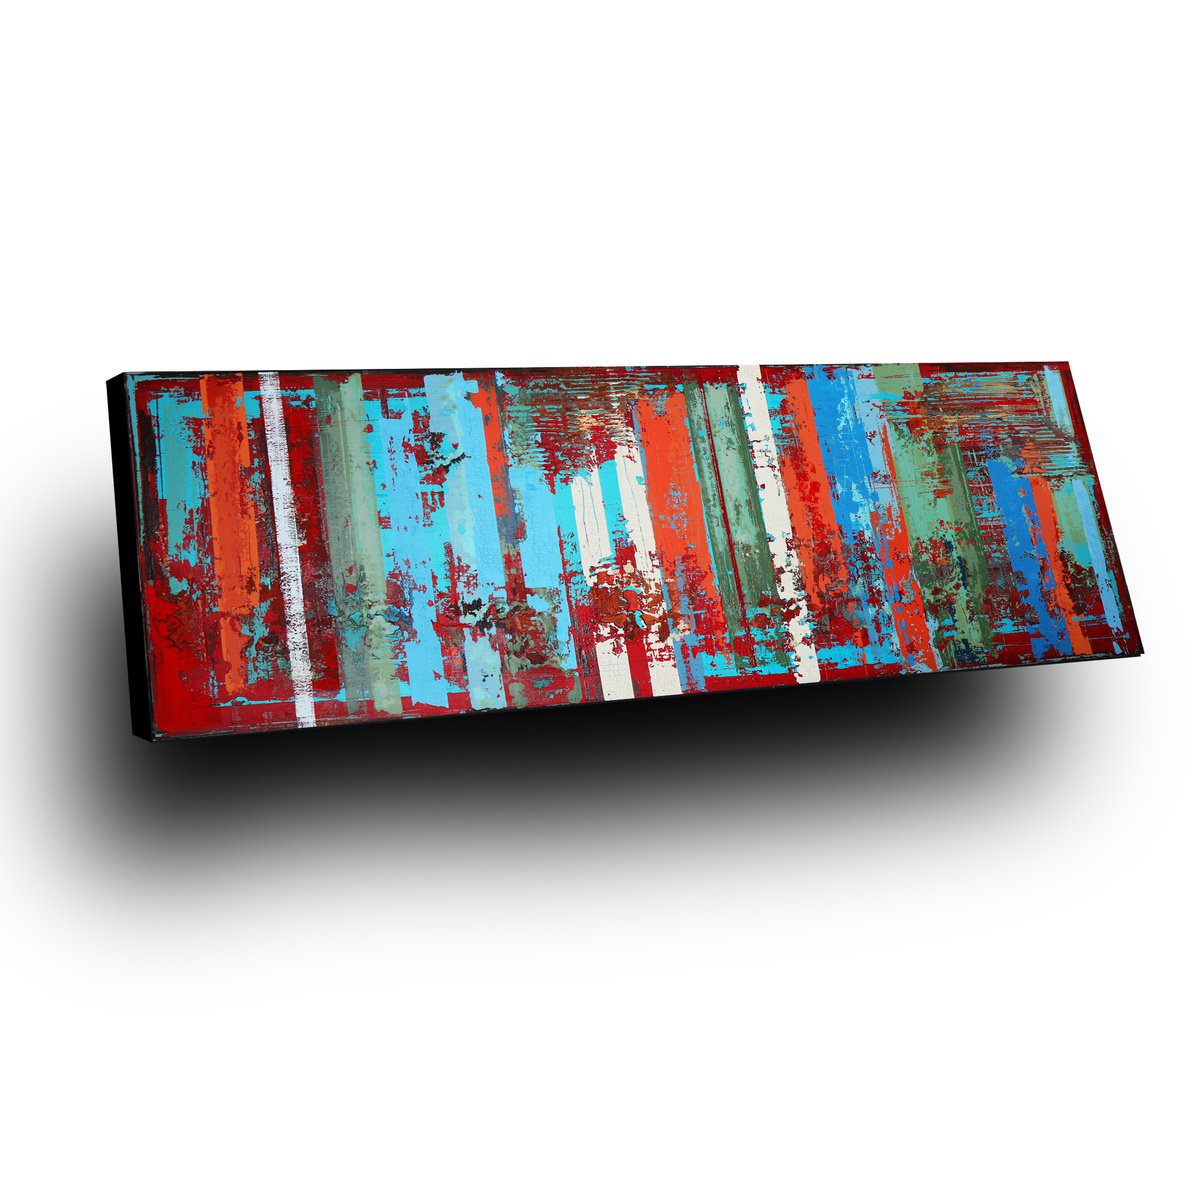 THE OLD FENCE - ABSTRACT ACRYLIC PAINTING TEXTURED * READY TO HANG by Inez Froehlich